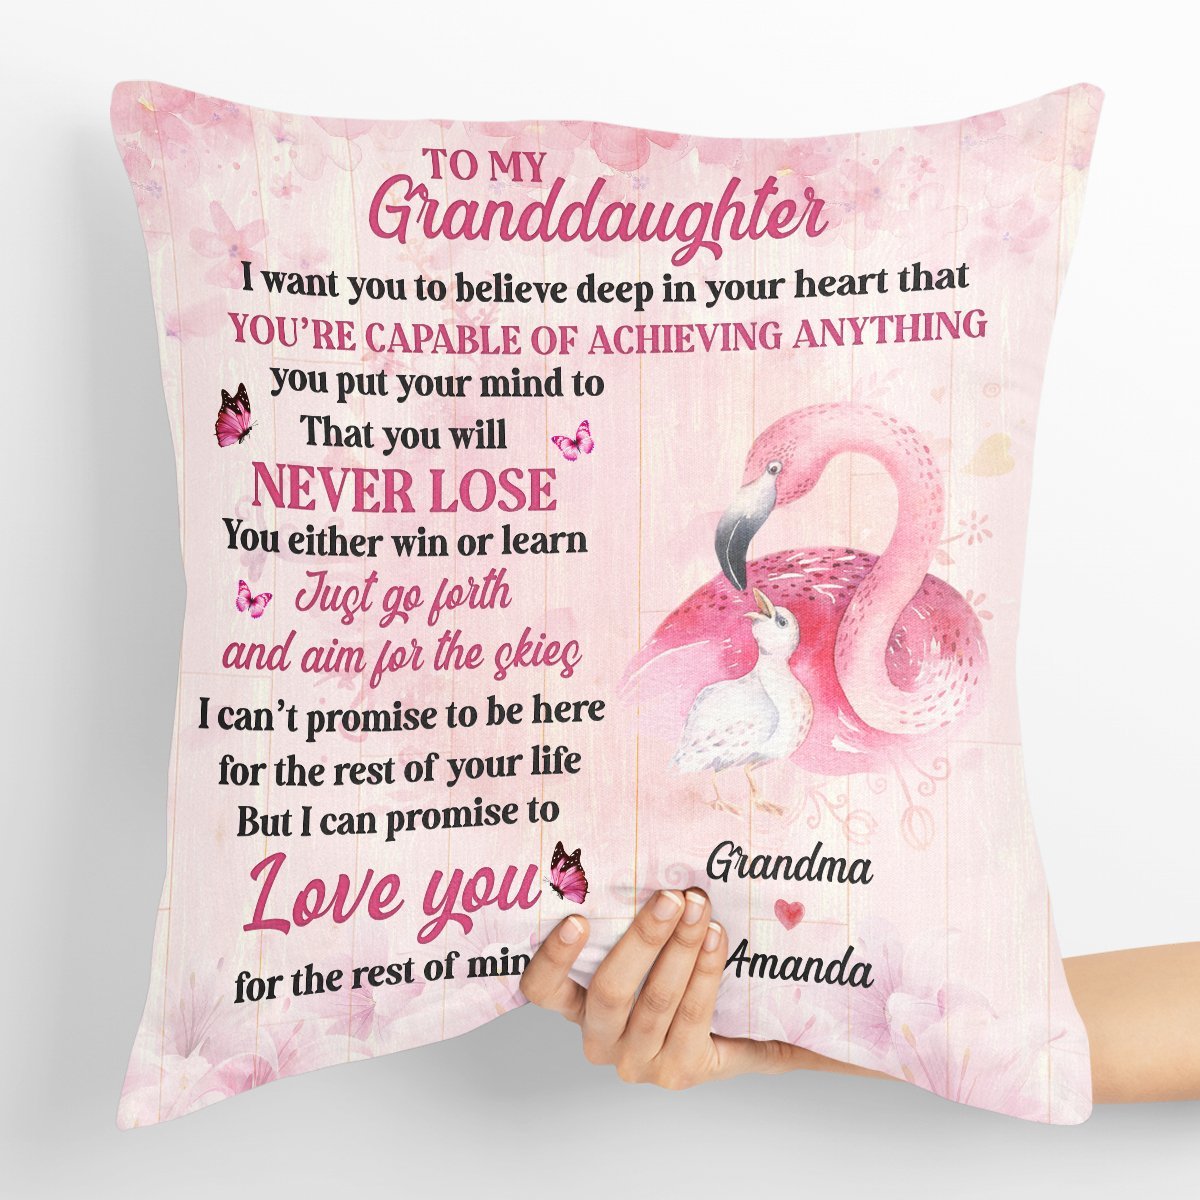 Lovely Personalized Throw Pillow For Grandchildren - Just Go Forth And Aim For The Skies NUHN221A - 4